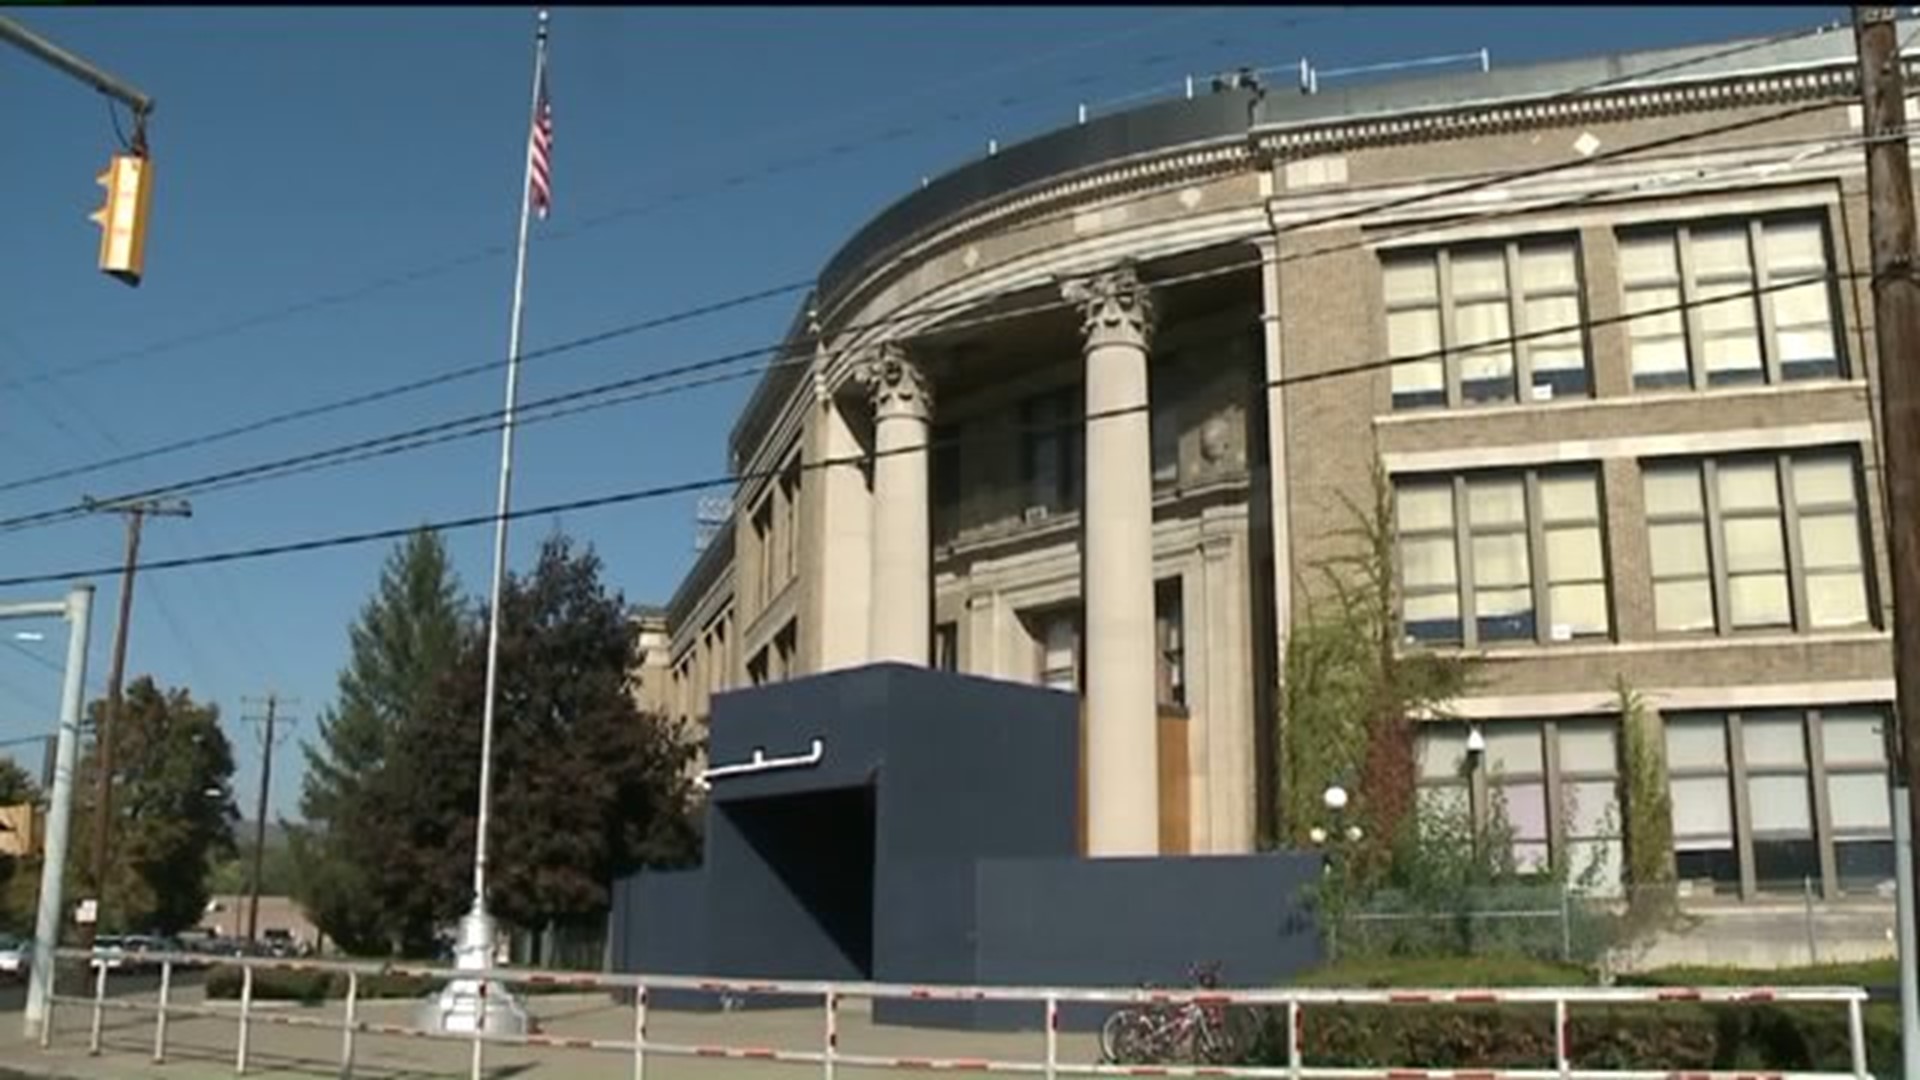 Parts of Meyers High School Could Be Saved, Rest Demolished